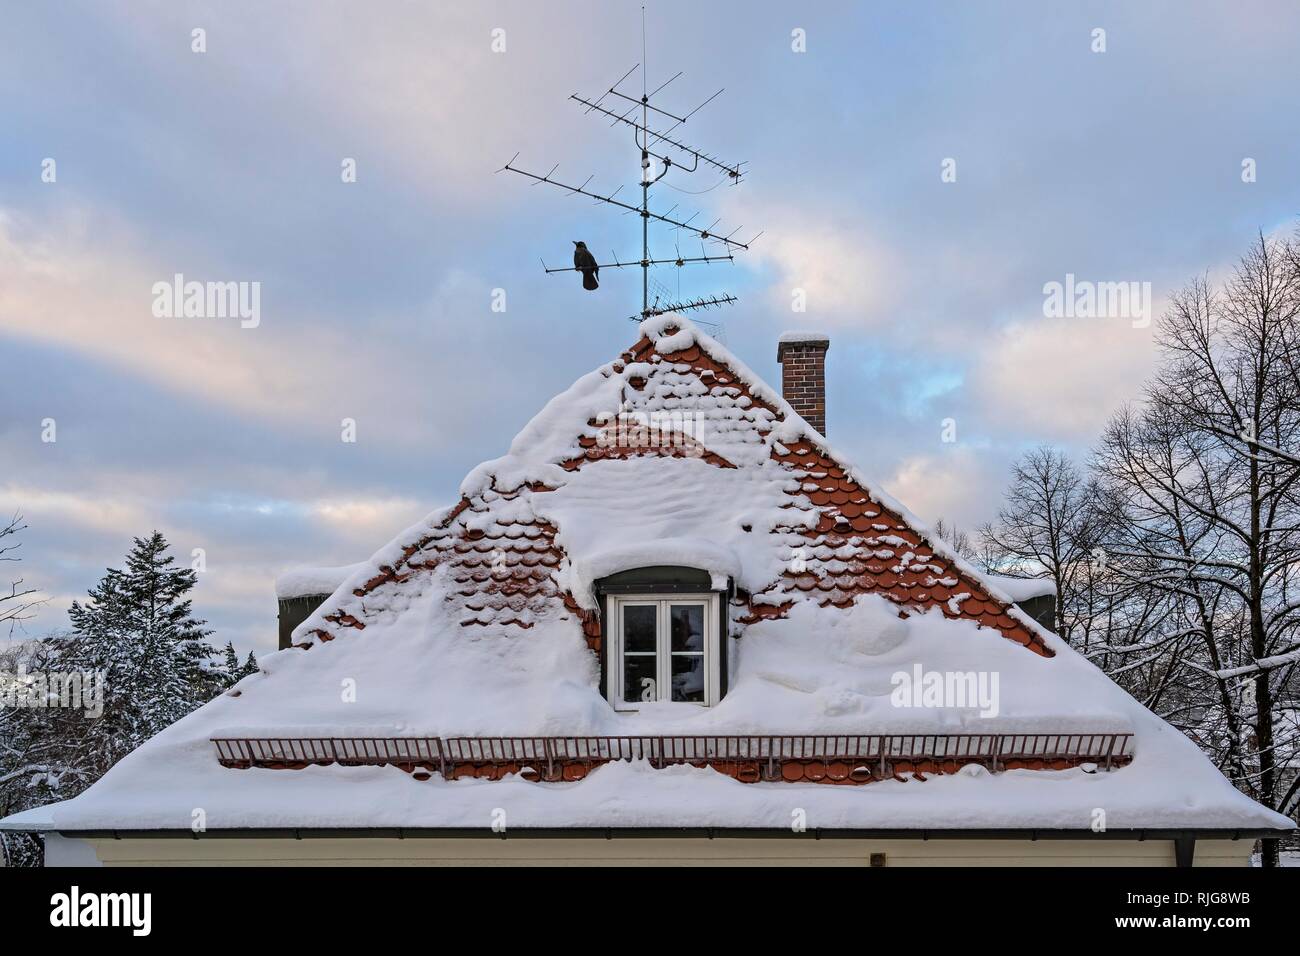 House roof with snow in winter, Munich, Upper Bavaria, Bavaria, Germany Stock Photo